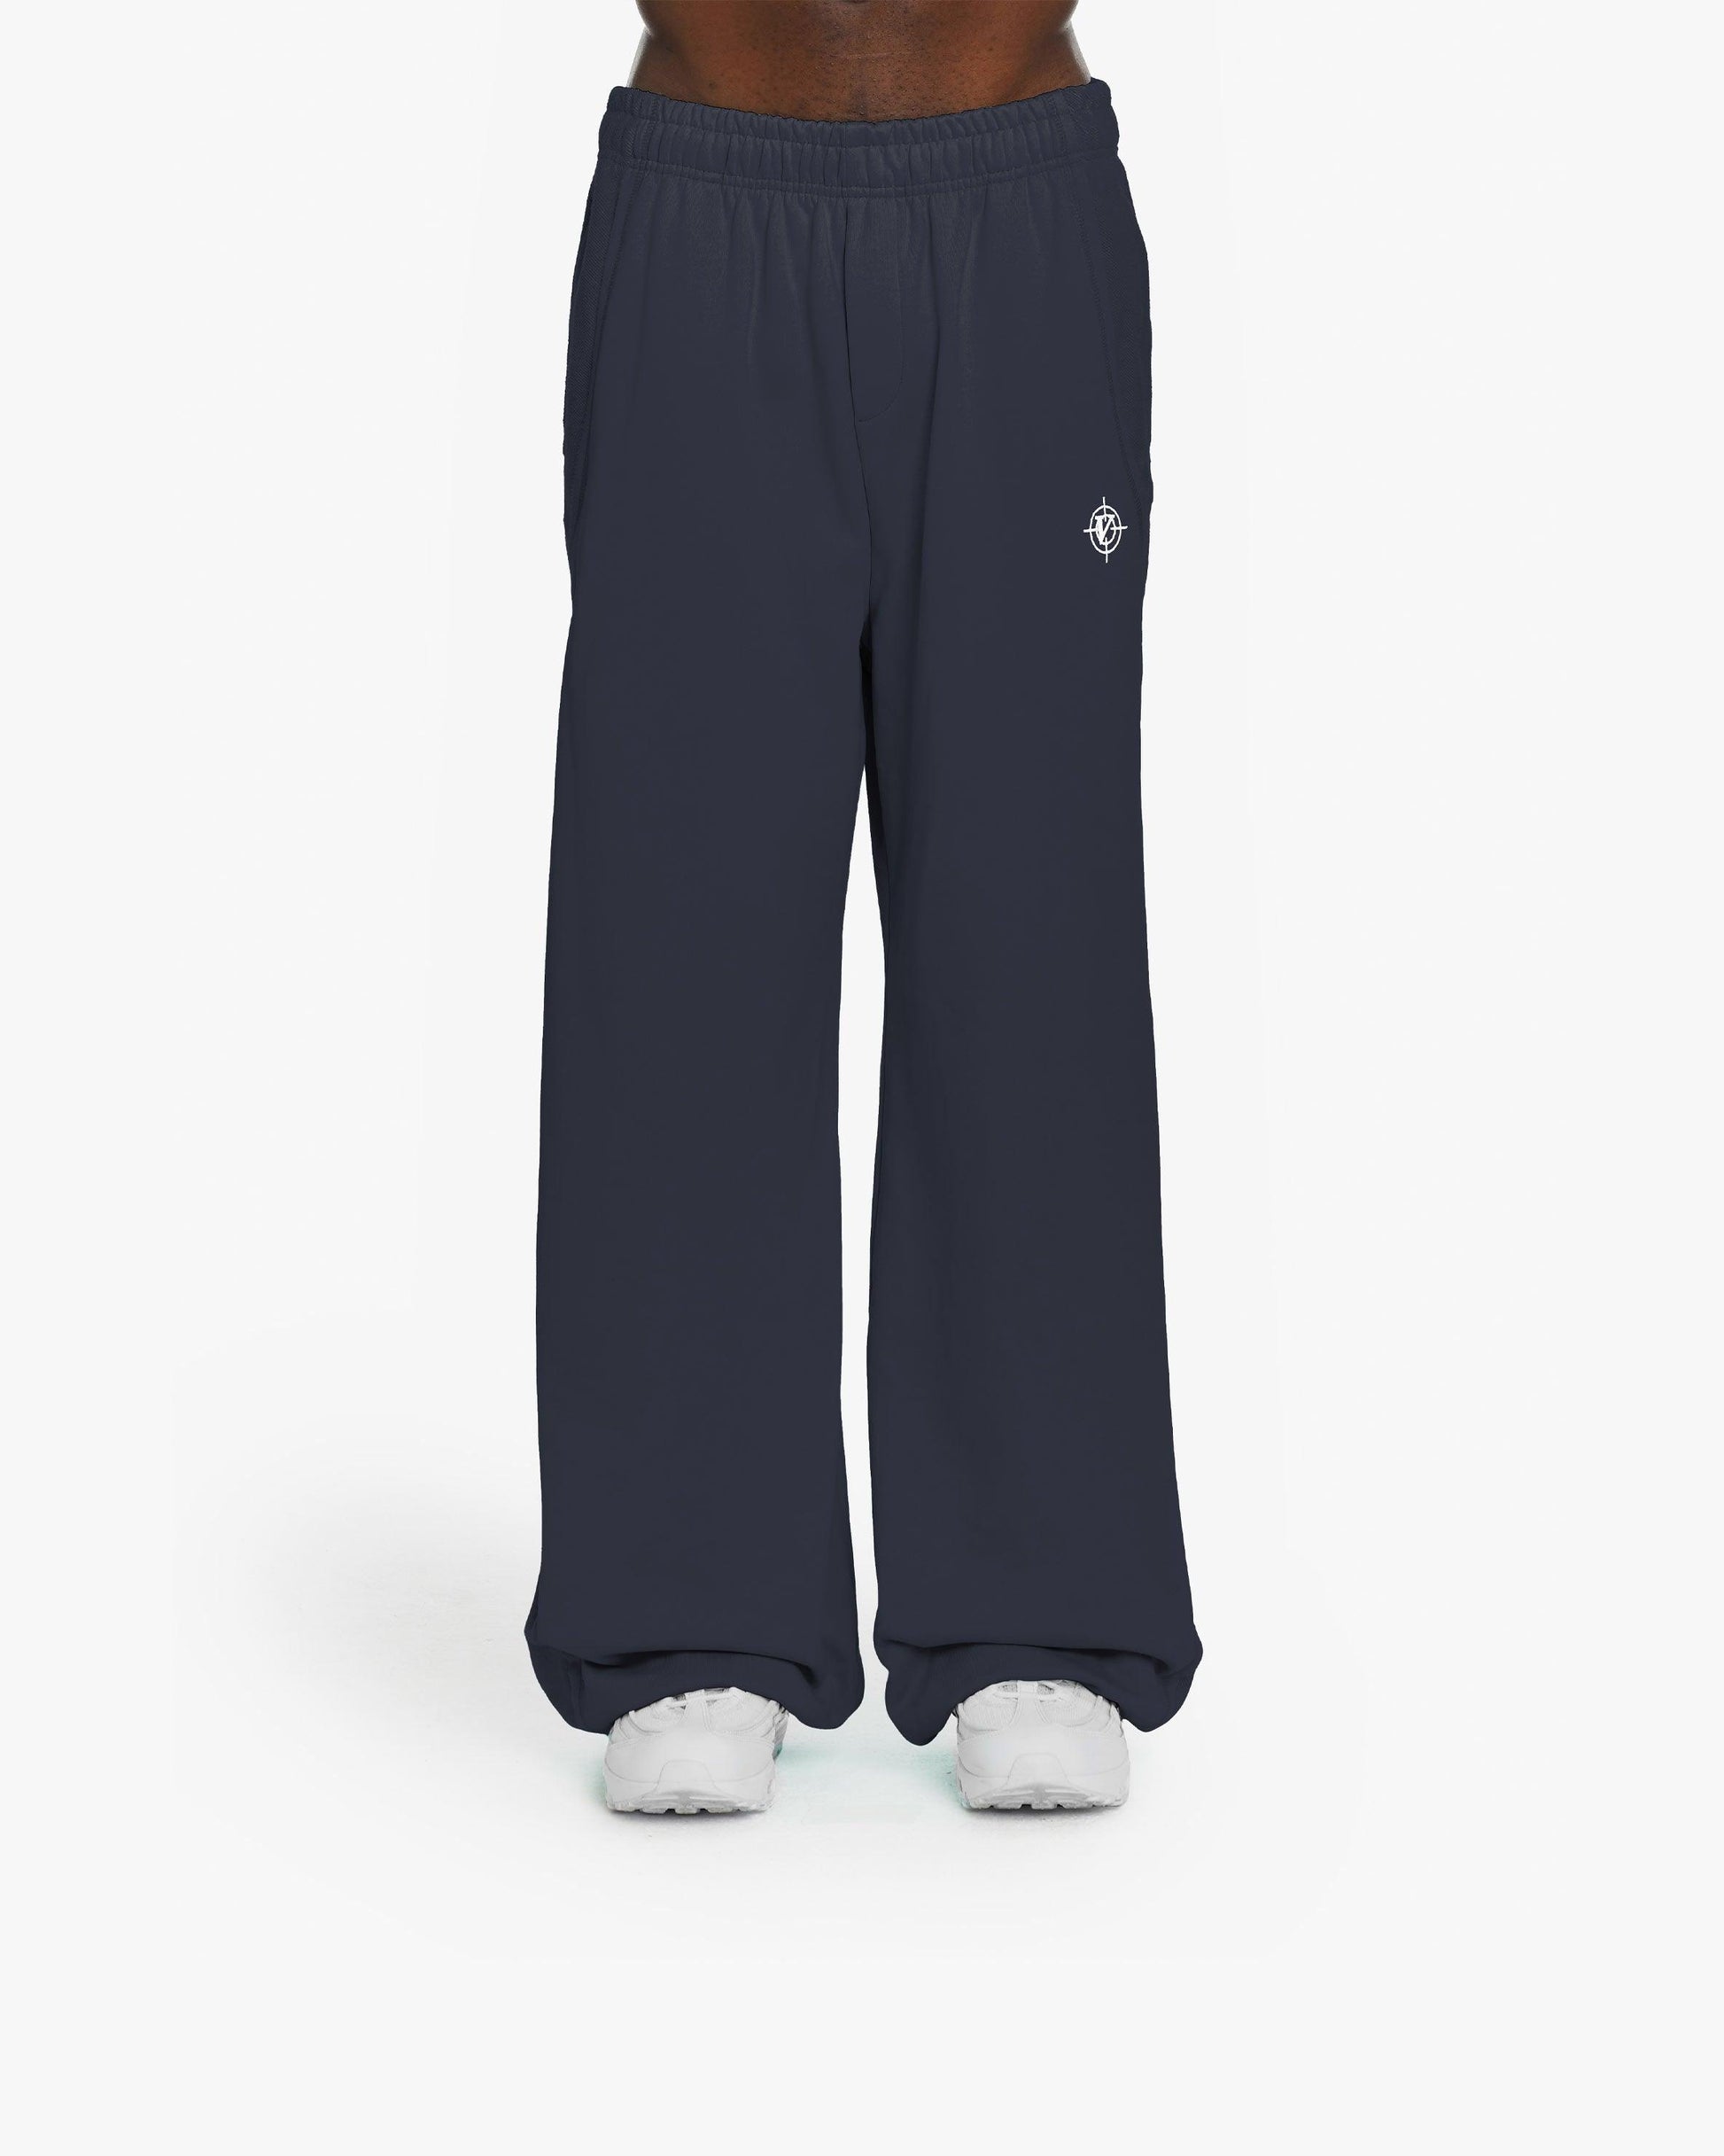 INSIDE OUT JOGGER NAVY - VICINITY